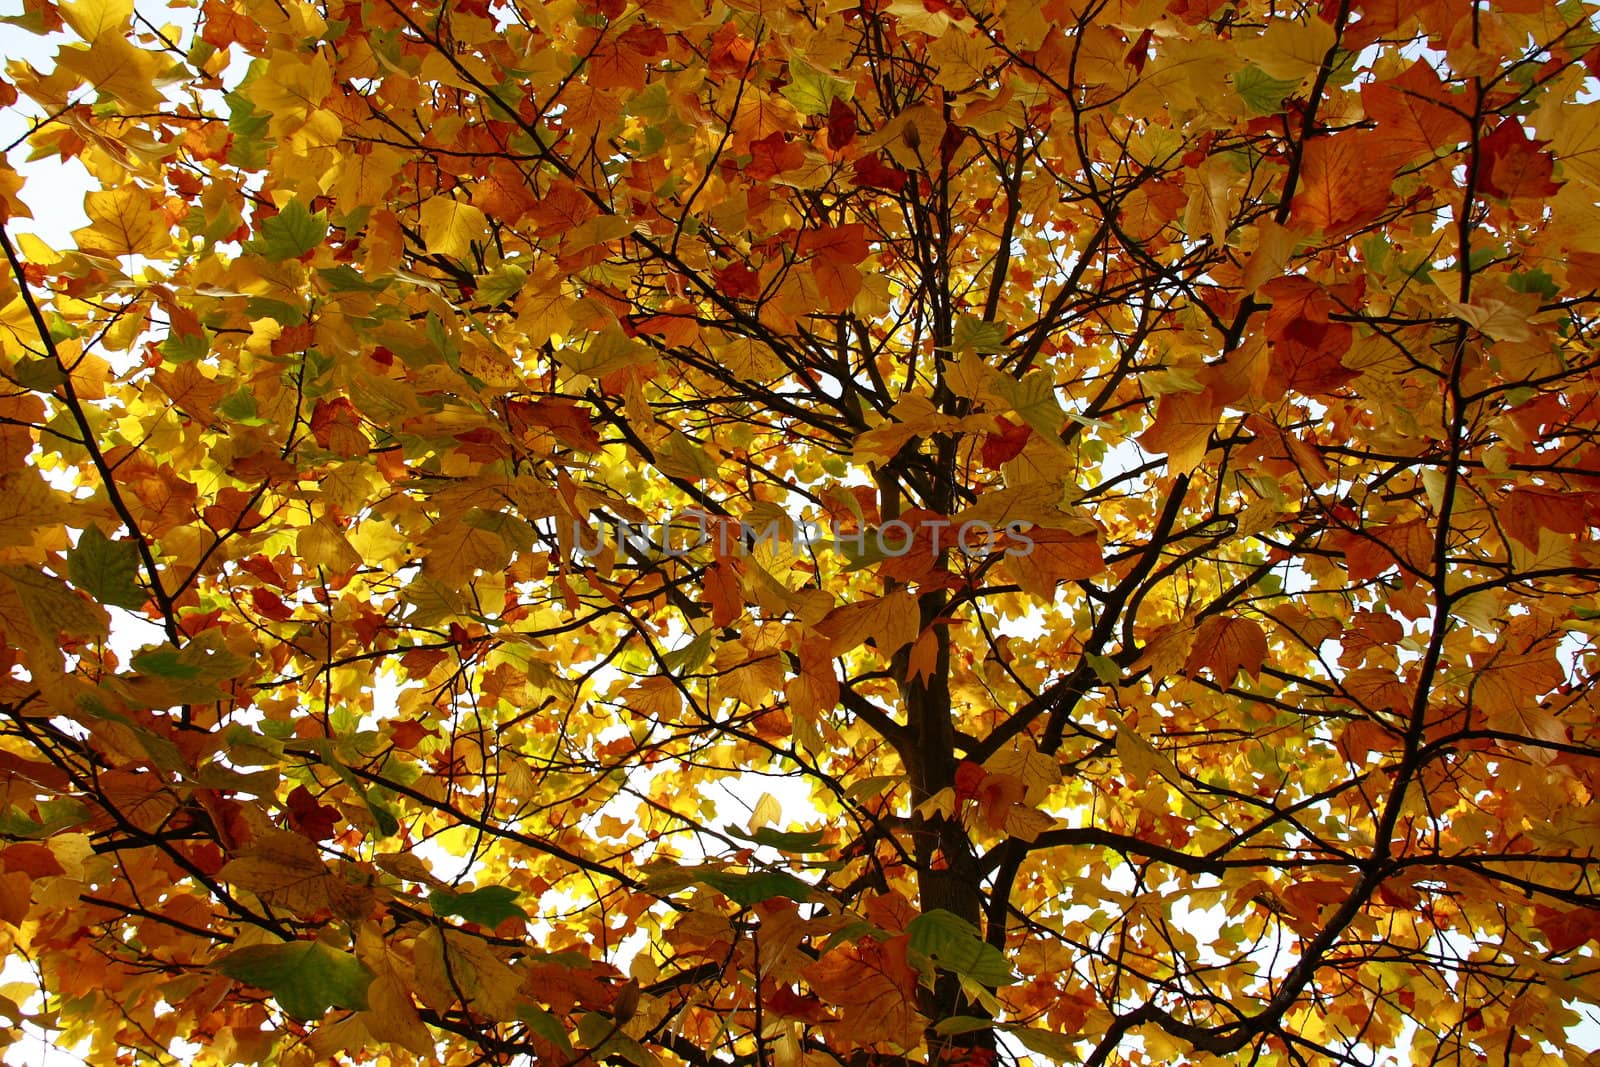 yellow leaves on tree in autumn for background